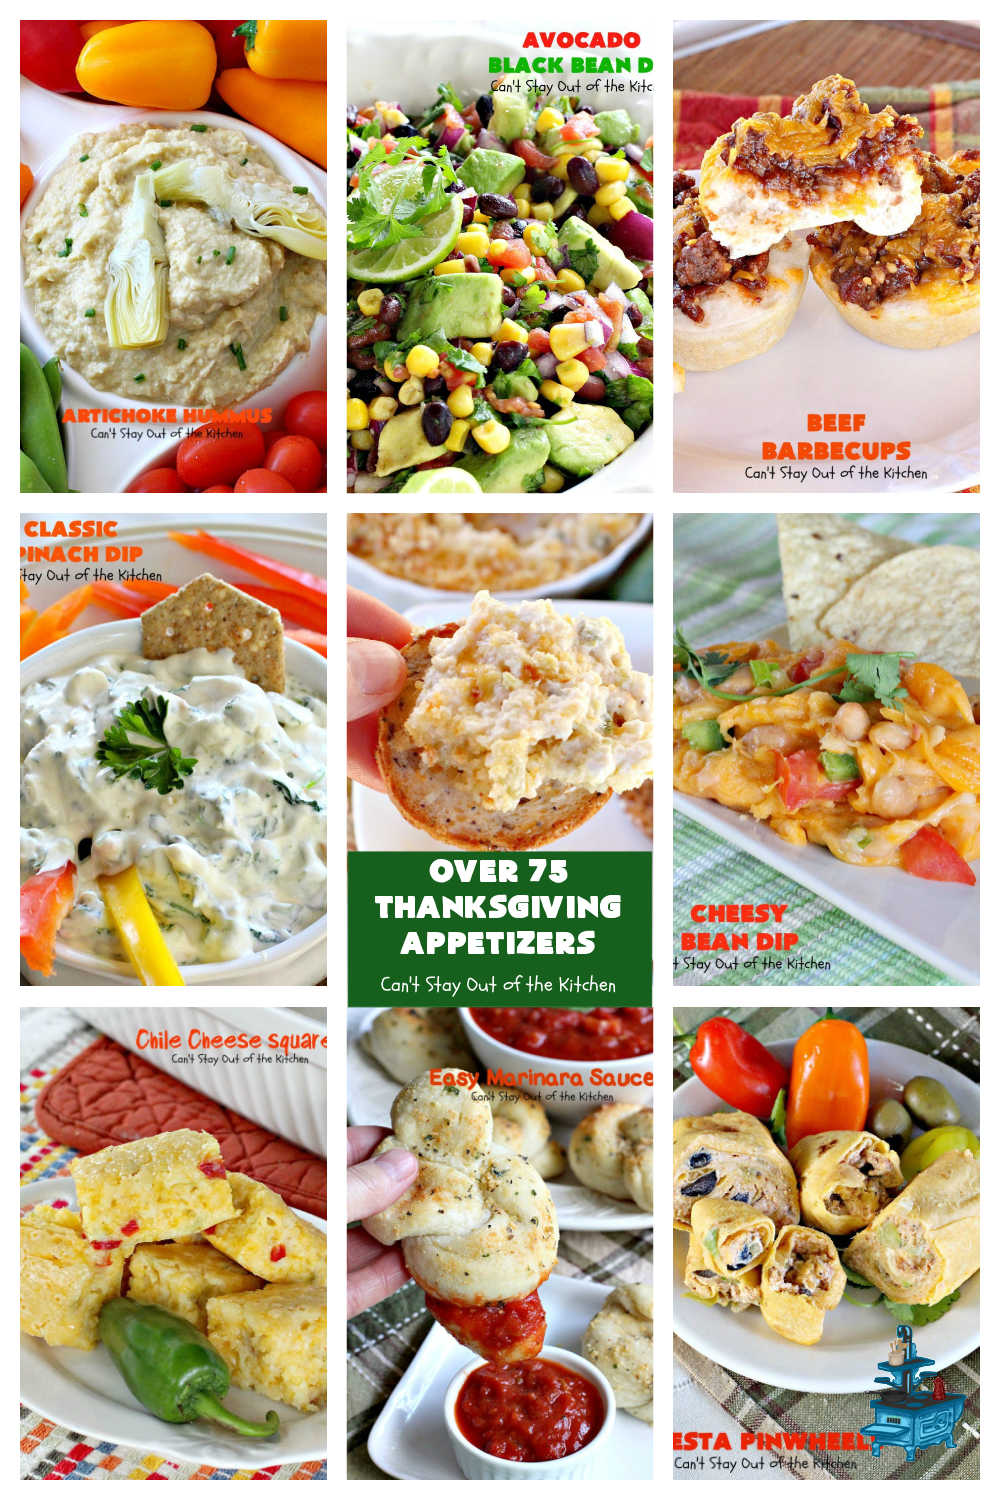 Thanksgiving Appetizers | Can't Stay Out of the Kitchen | Over 75 favorite #appetizer #recipes including #RollUps #TortillaPinwheels #guacamole #hummus #TexMex, #PizzaCups & so much more. Great ideas for snacking on during the #Thanksgiving #FootBallGame. Many of these are #GlutenFree. #tailgating #appetizers #holiday #HolidayAppetizers #ThanksgivingAppetizers